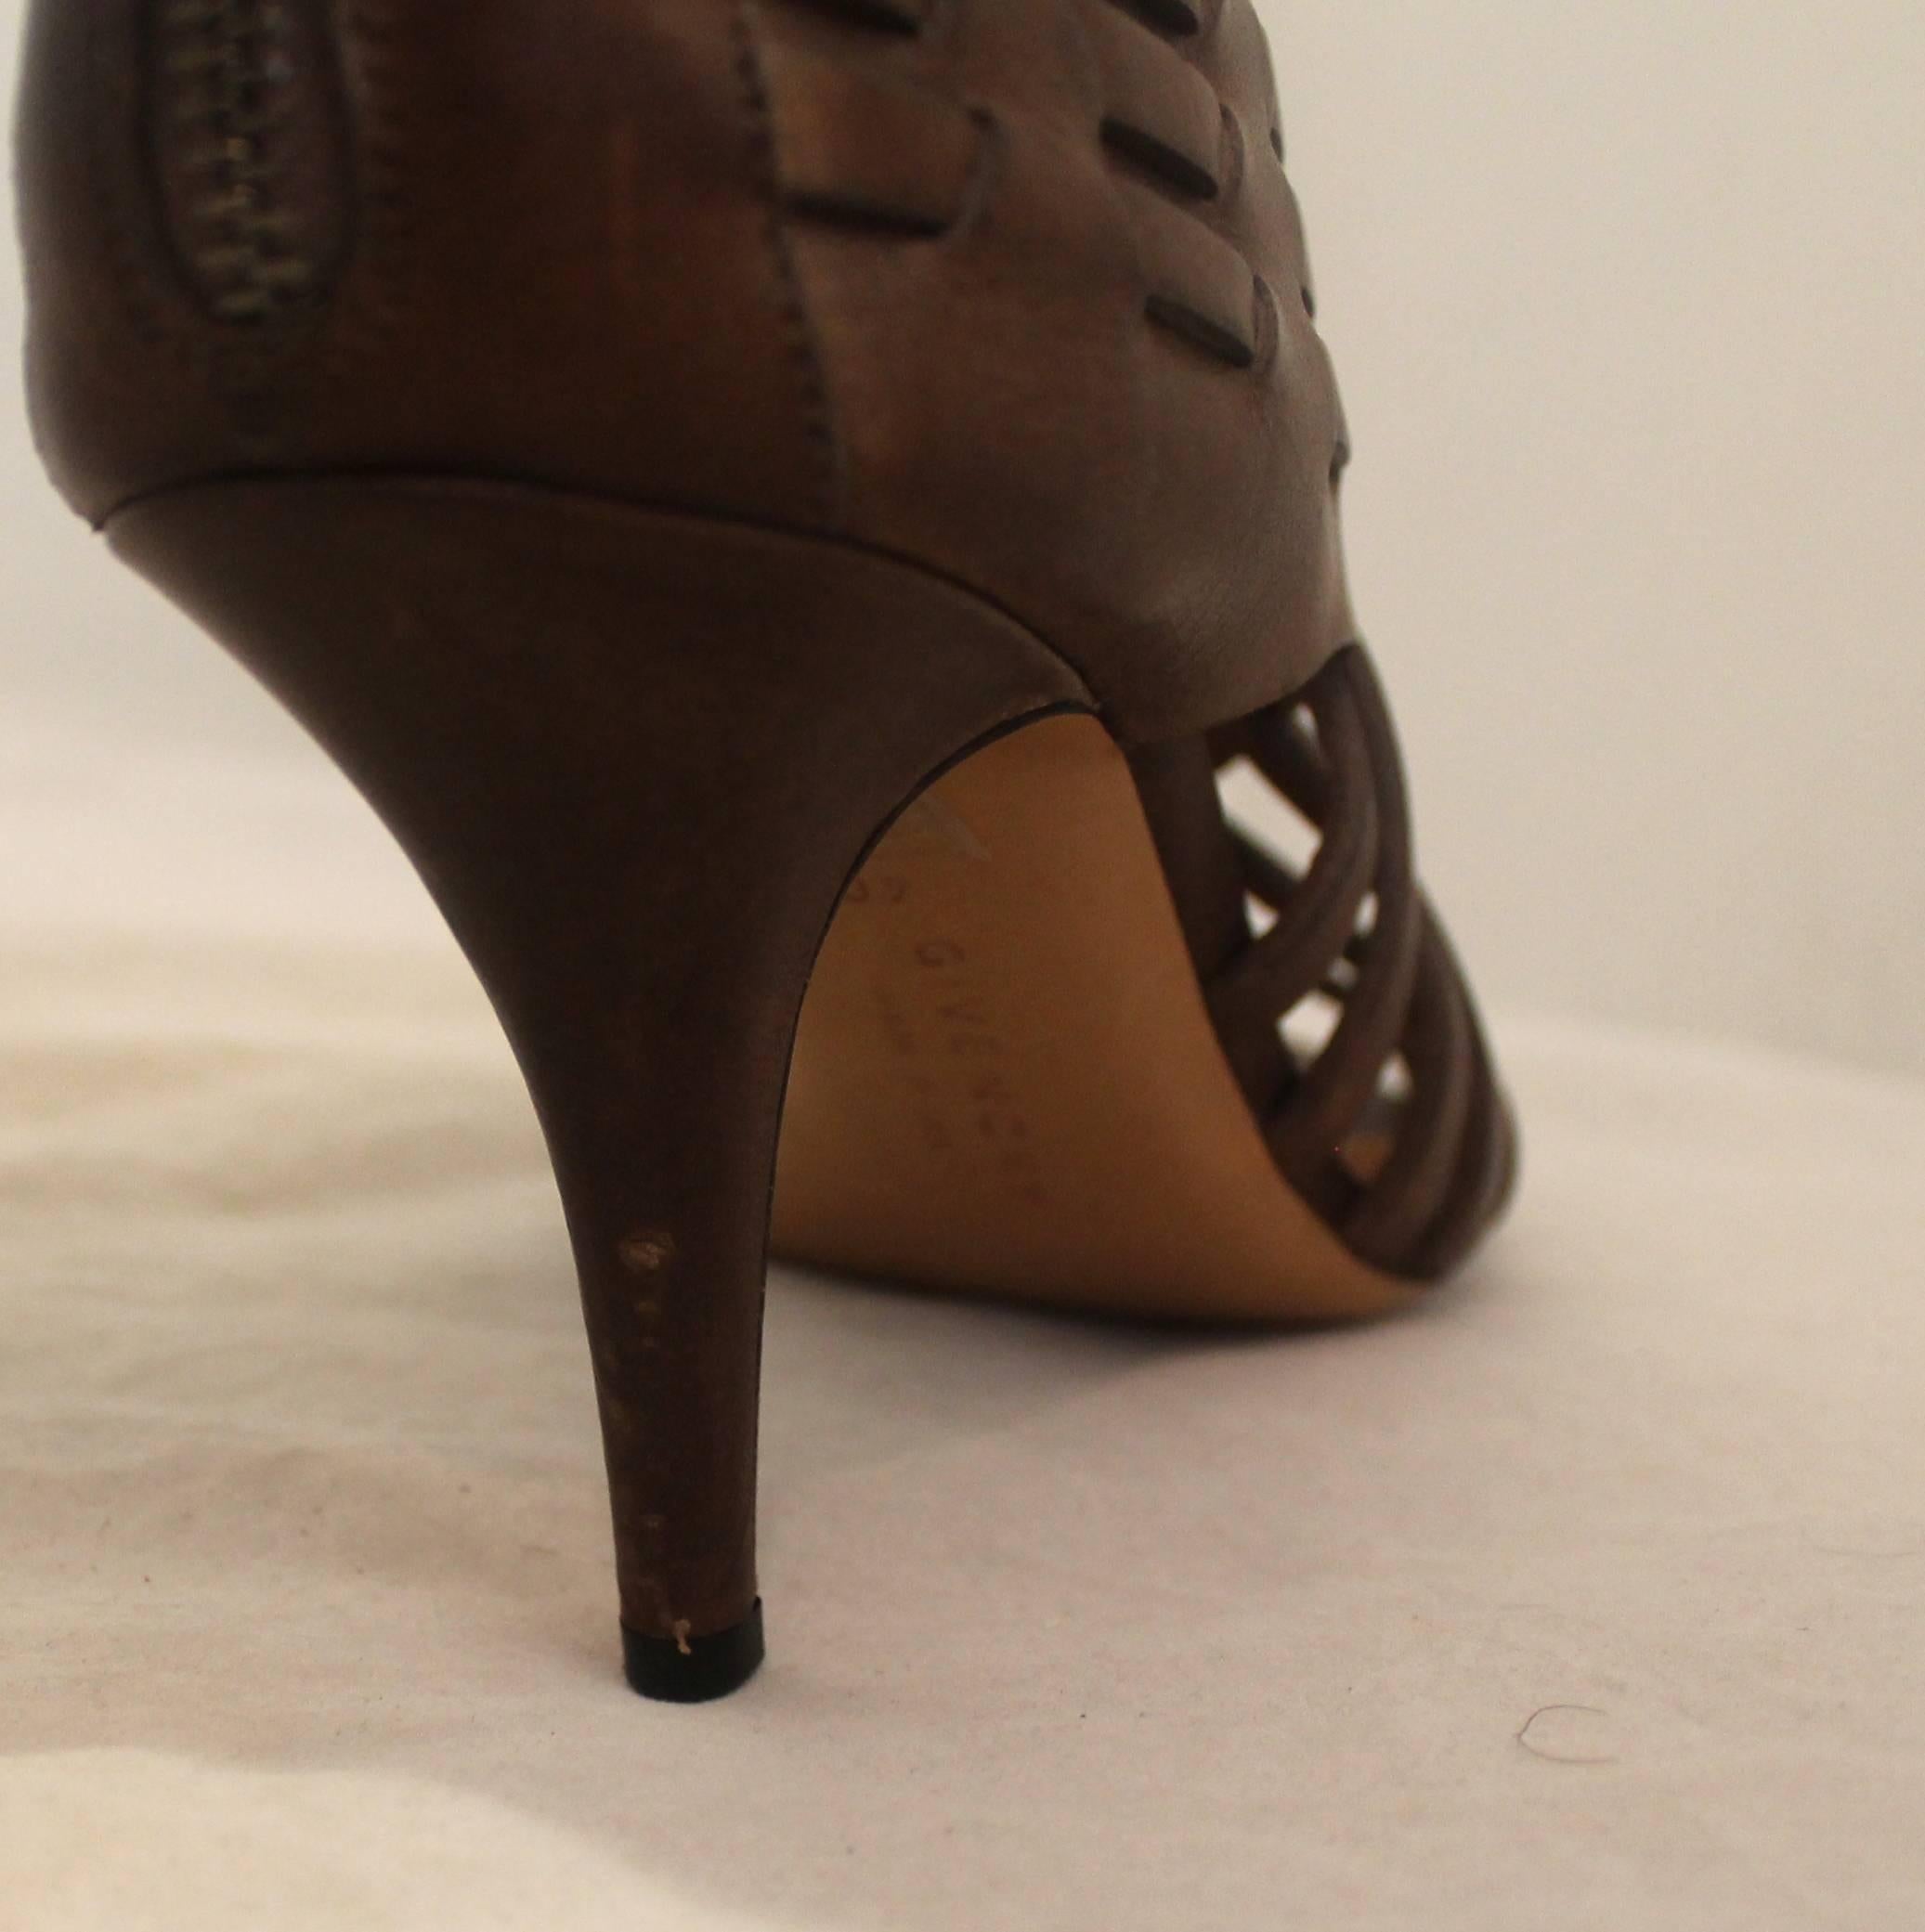 Givenchy Brown Woven Leather Sandal Bootie with Back Zipper - 40 1